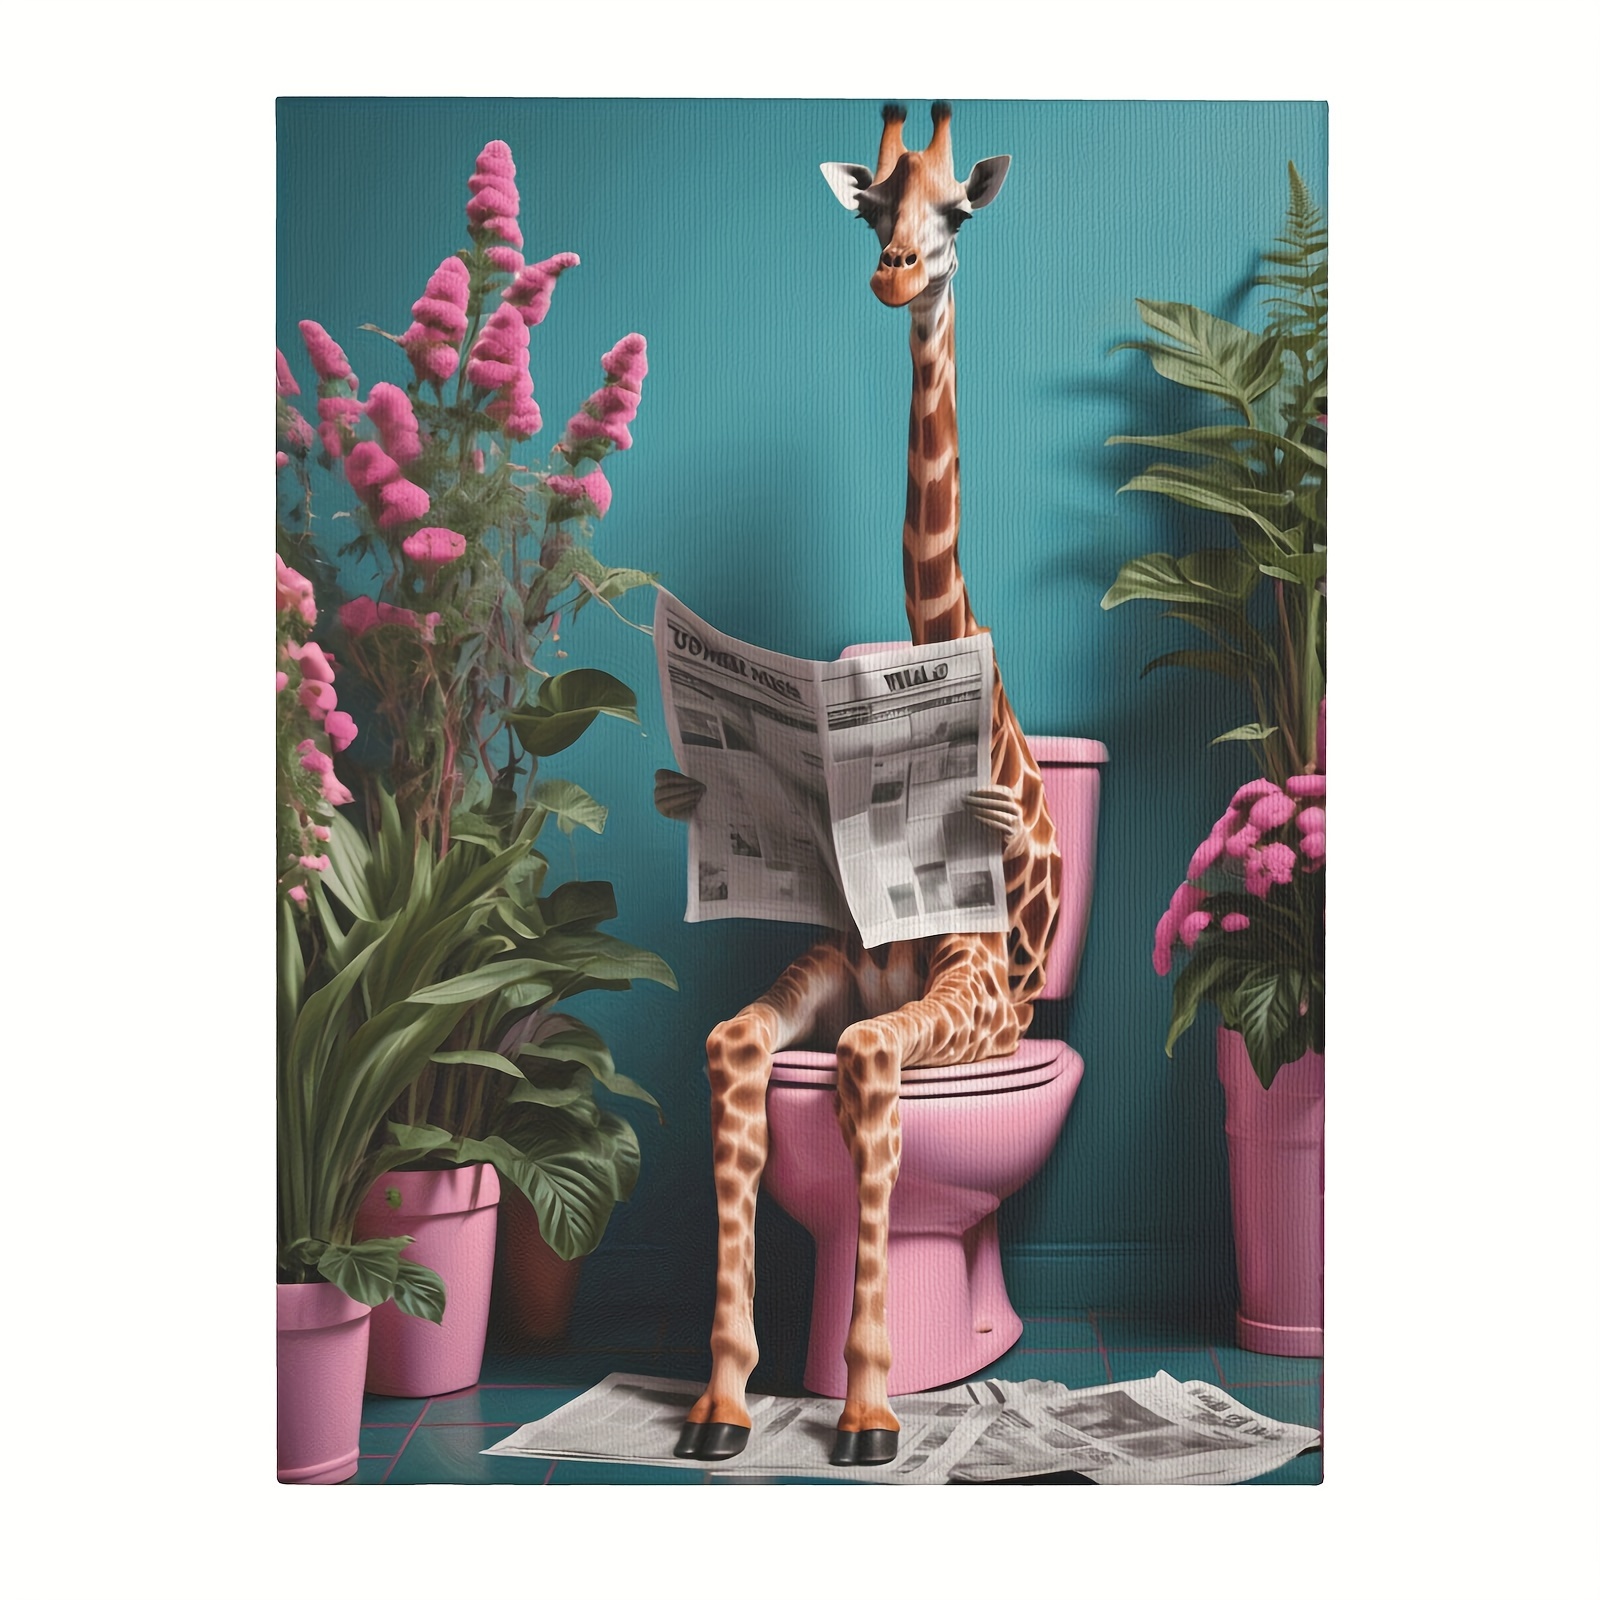 

Funny Giraffe Reading Newspaper On Toilet - High-definition Framed Canvas Art, 12x16" - Perfect For Living Room/bedroom/home Office Decor - Ready To Hang